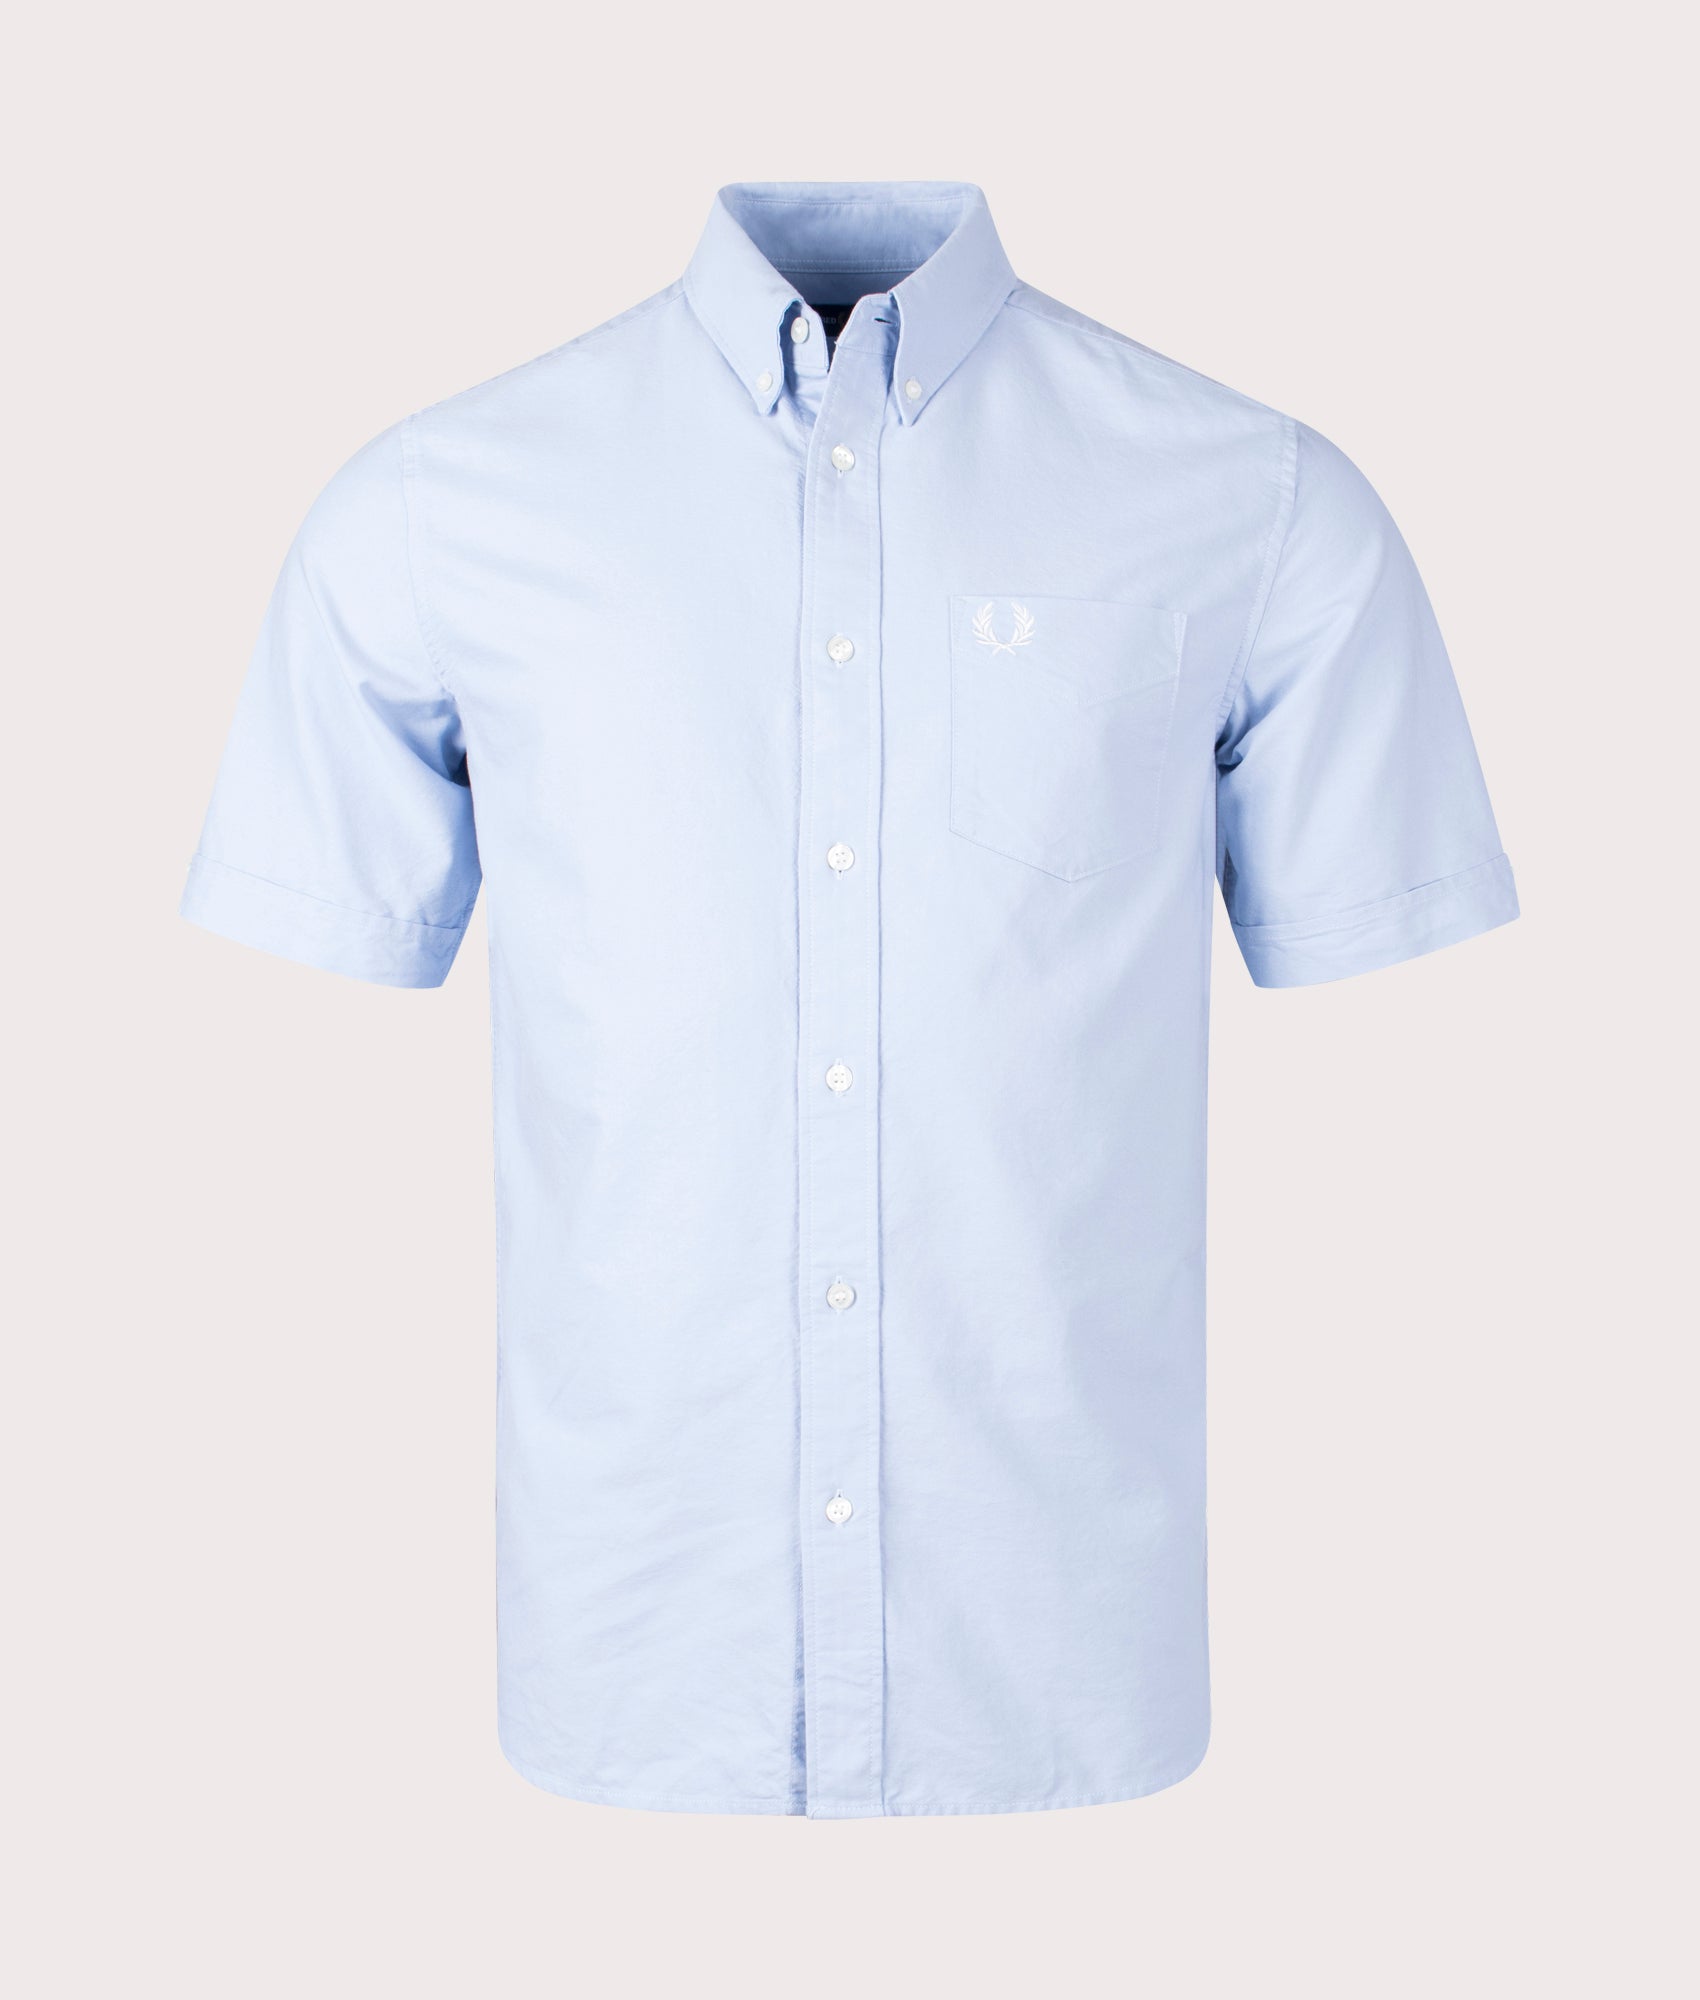 Fred Perry Mens Short Sleeve Oxford Shirt - Colour: 146 Light Smoke - Size: Large